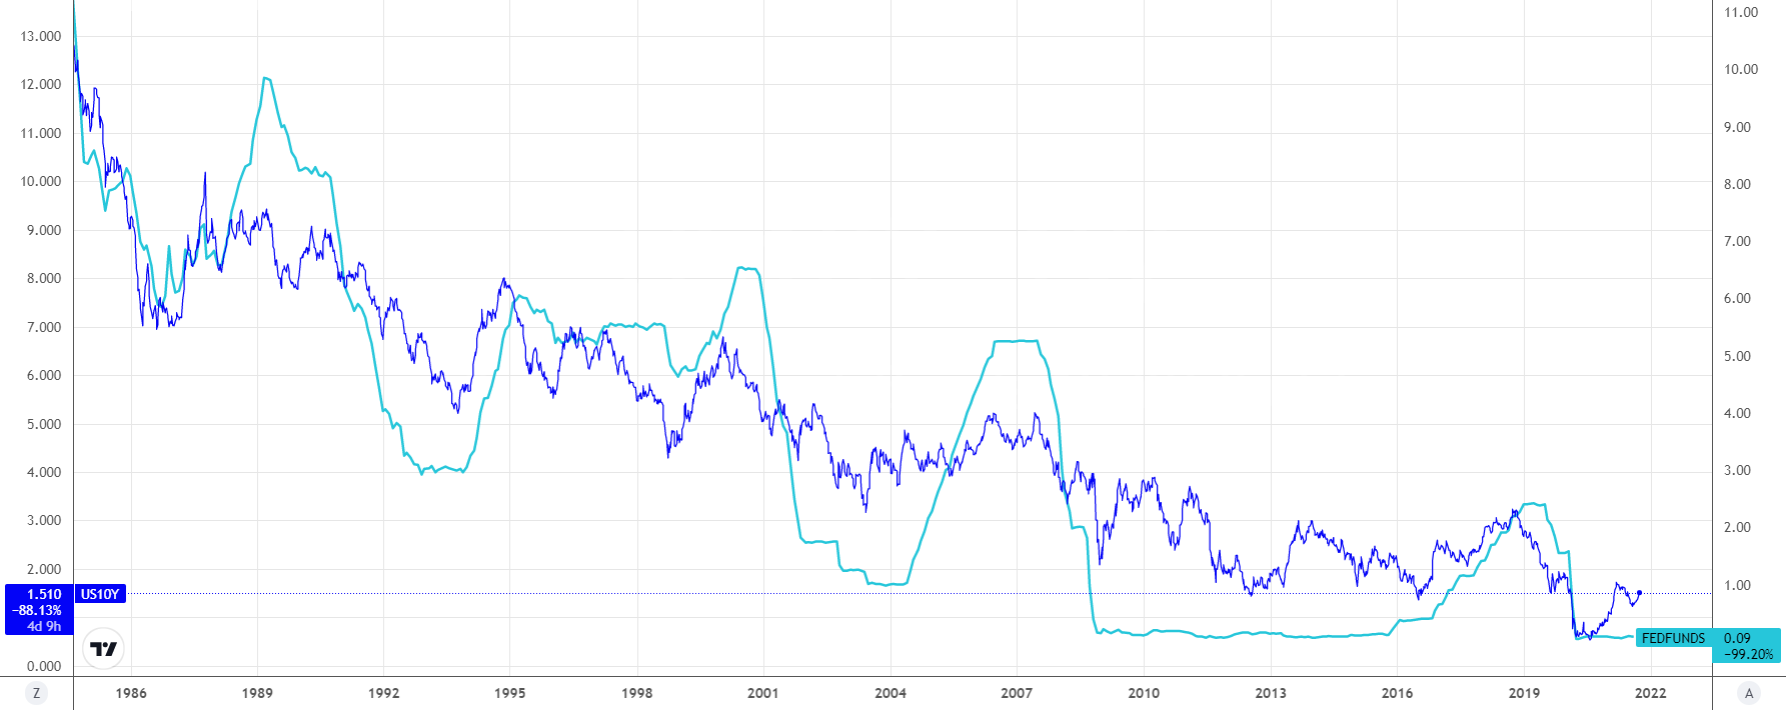 US_Yields_vs_rates_Sept_21.png